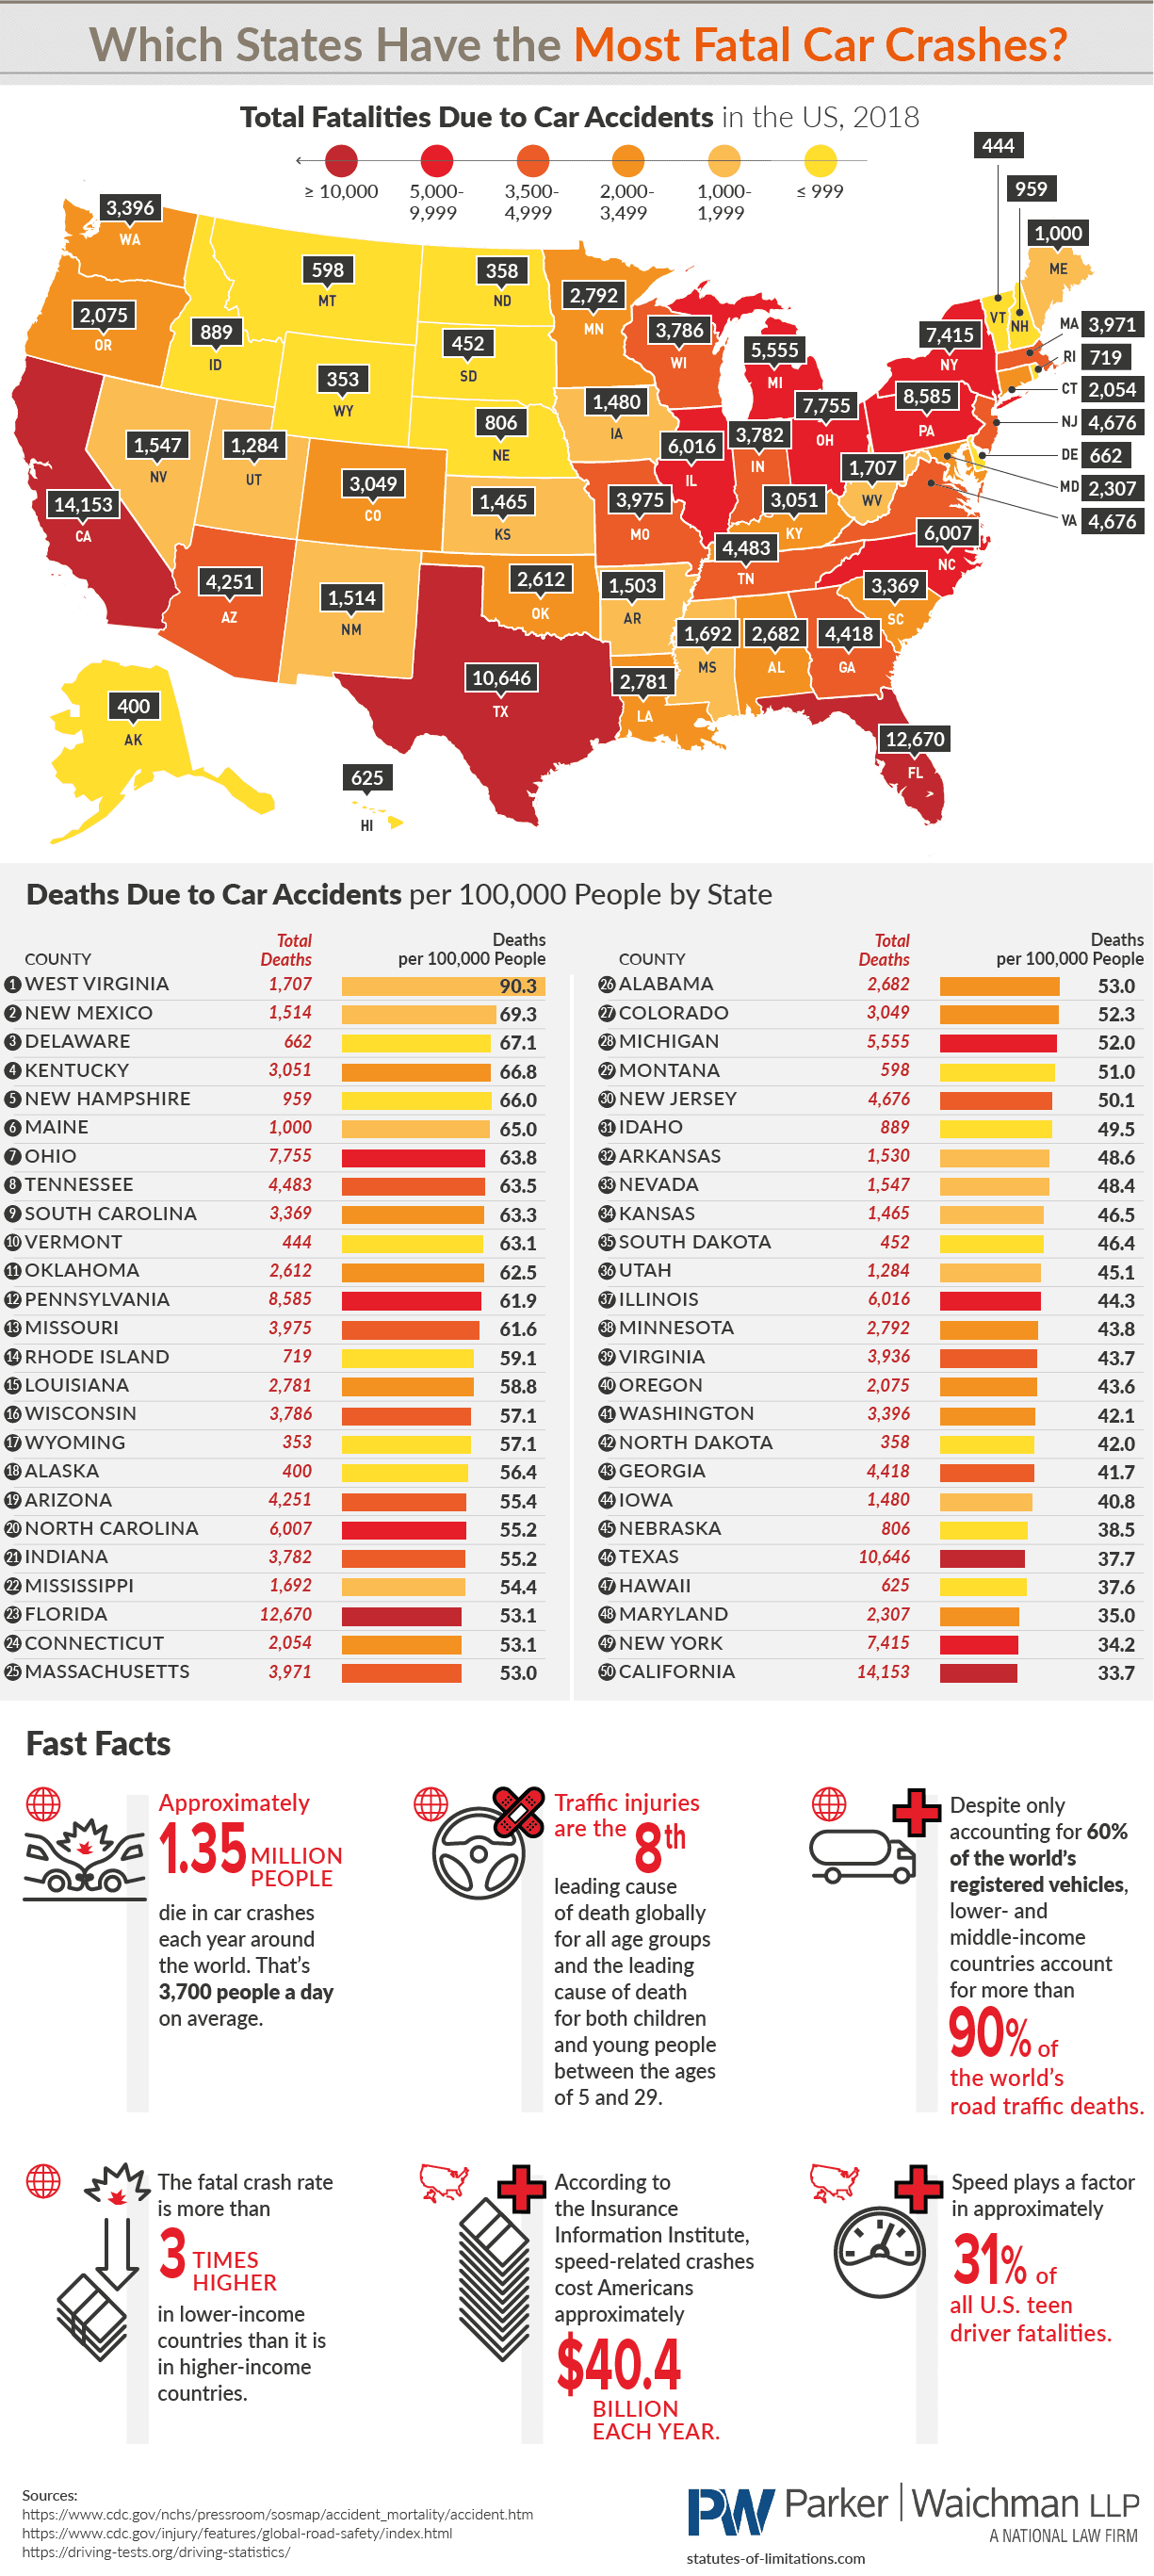 The States With the Most Fatal Car Crashes per 100000 People